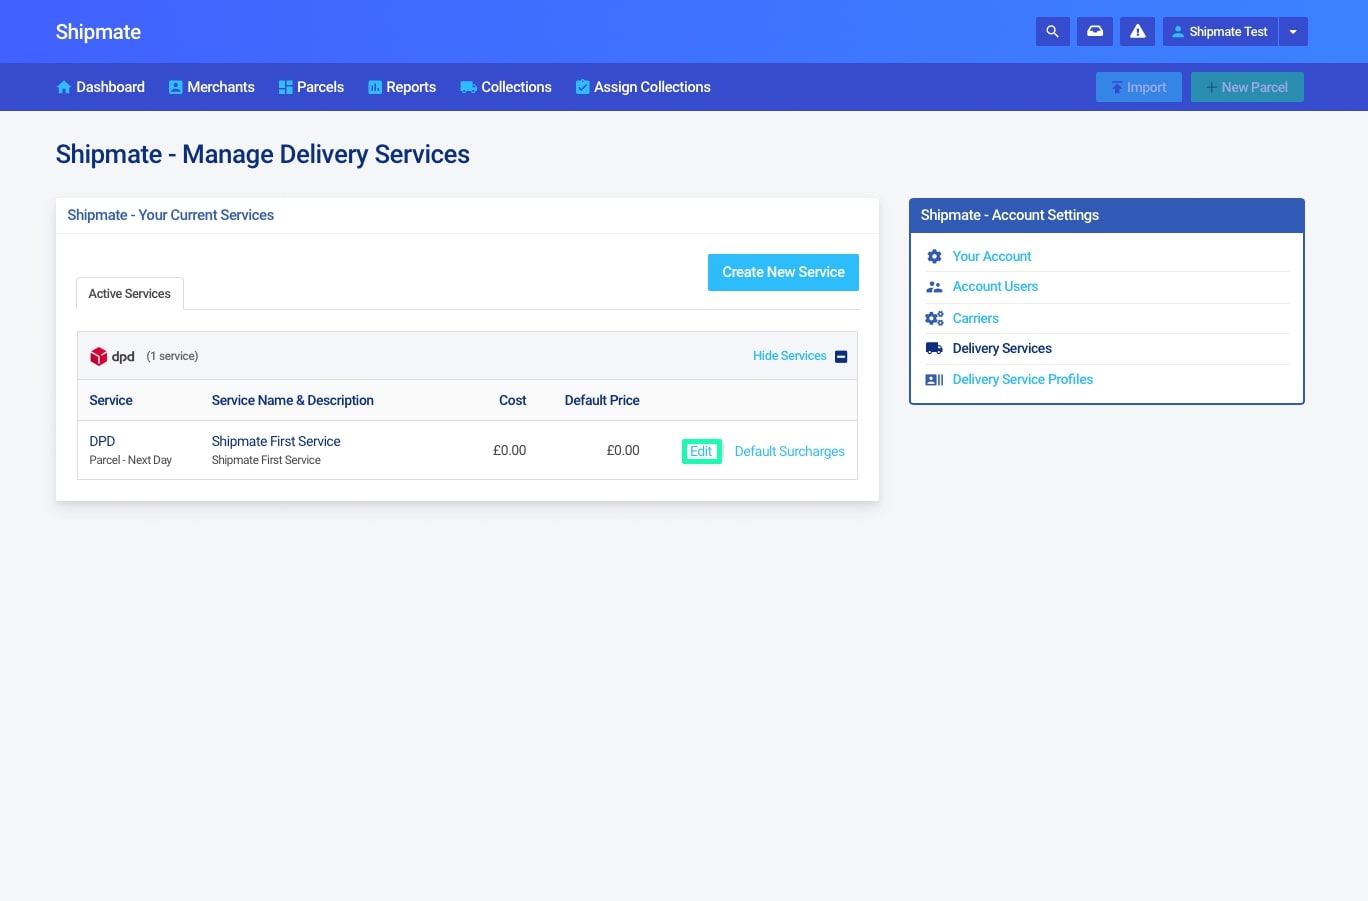 Shipmate - Your Account - Editing a Delivery Service